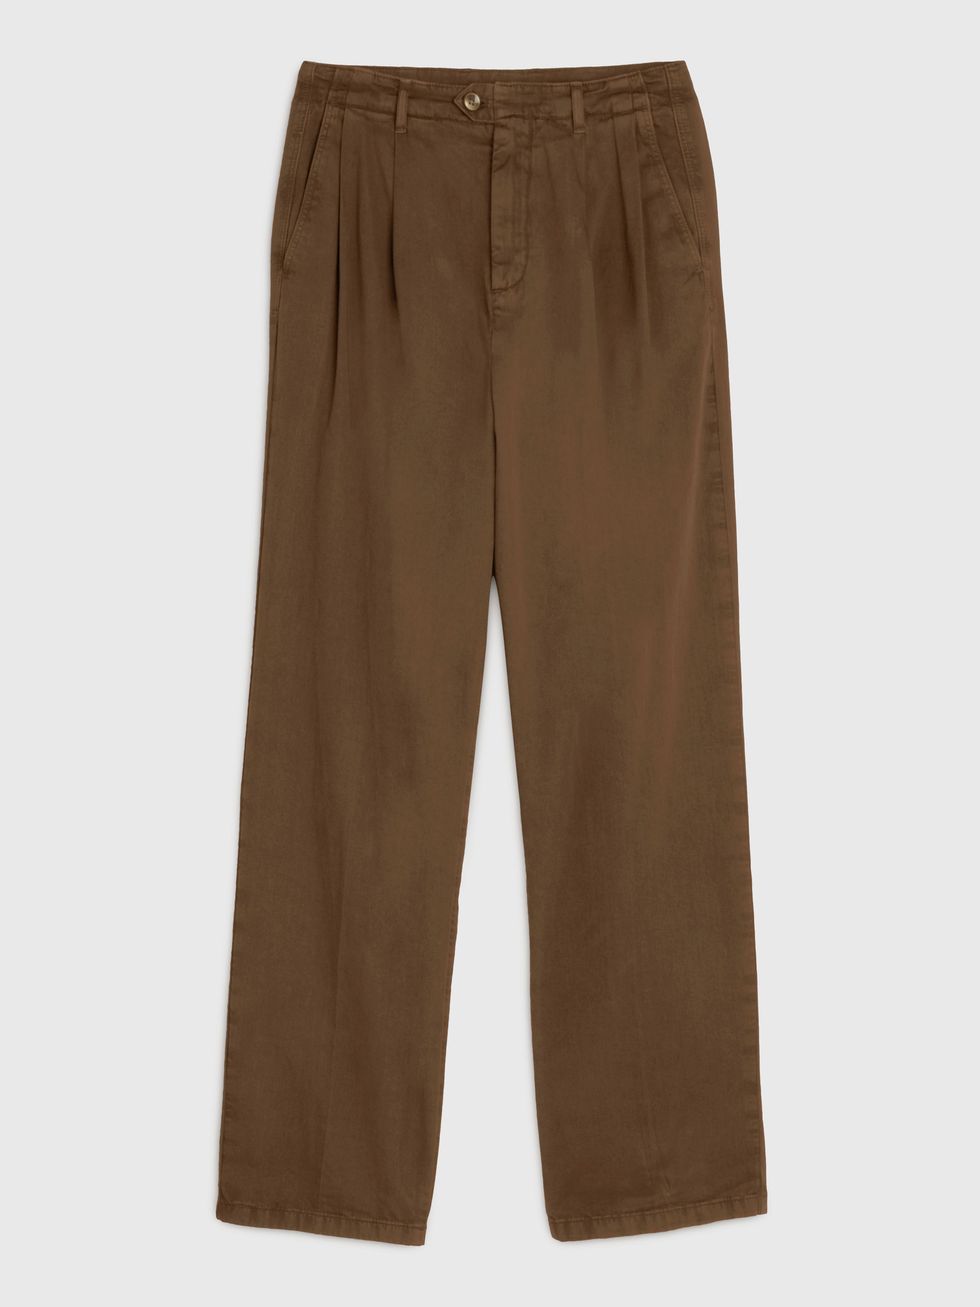 Tommy Hilfiger x Shawn Mendes Pleated Trouser